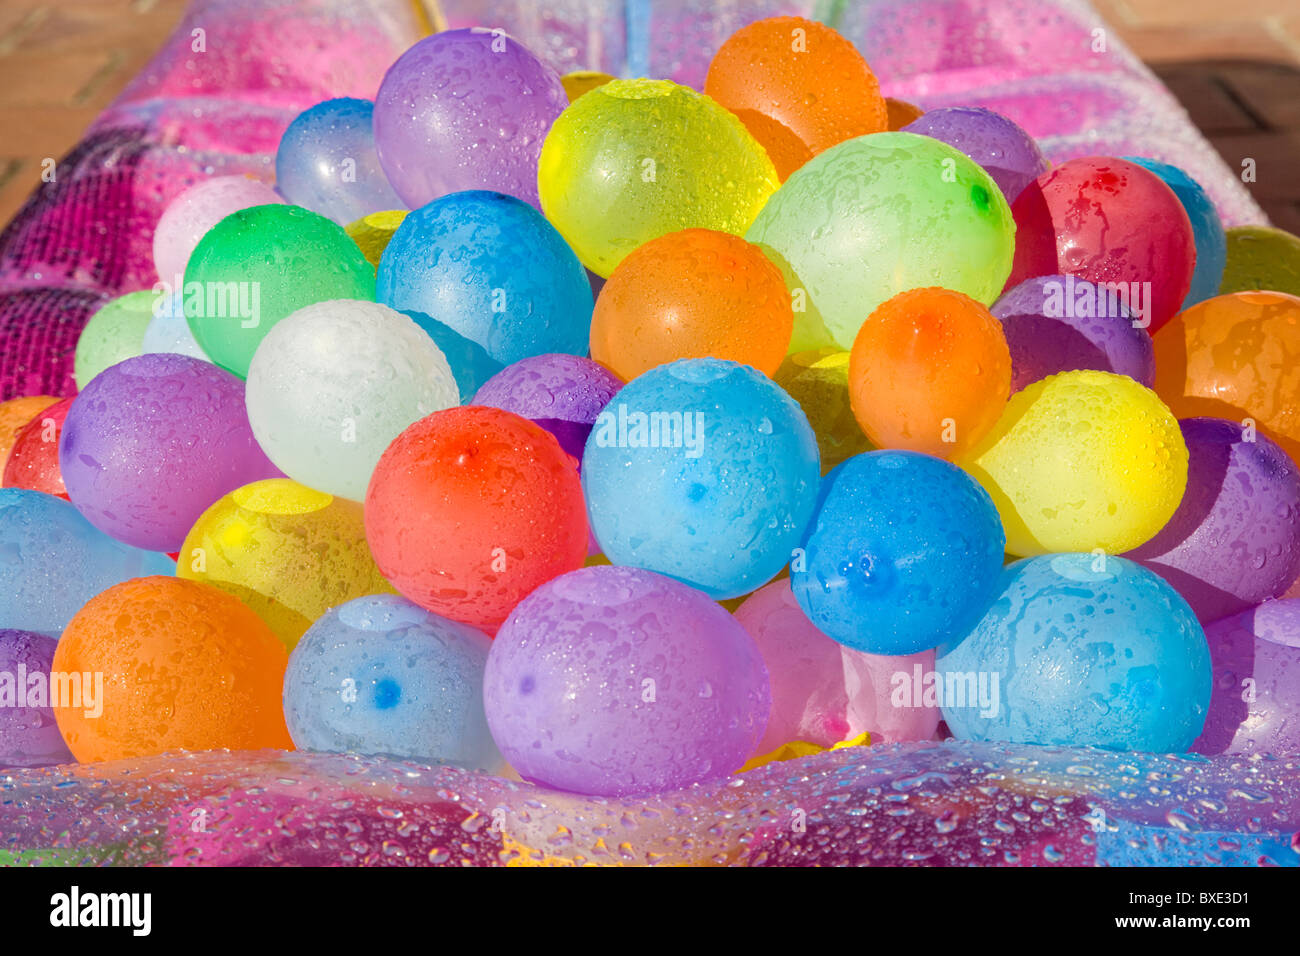 Multicolored water filled colored balloons laying on a moistened air-bed Stock Photo